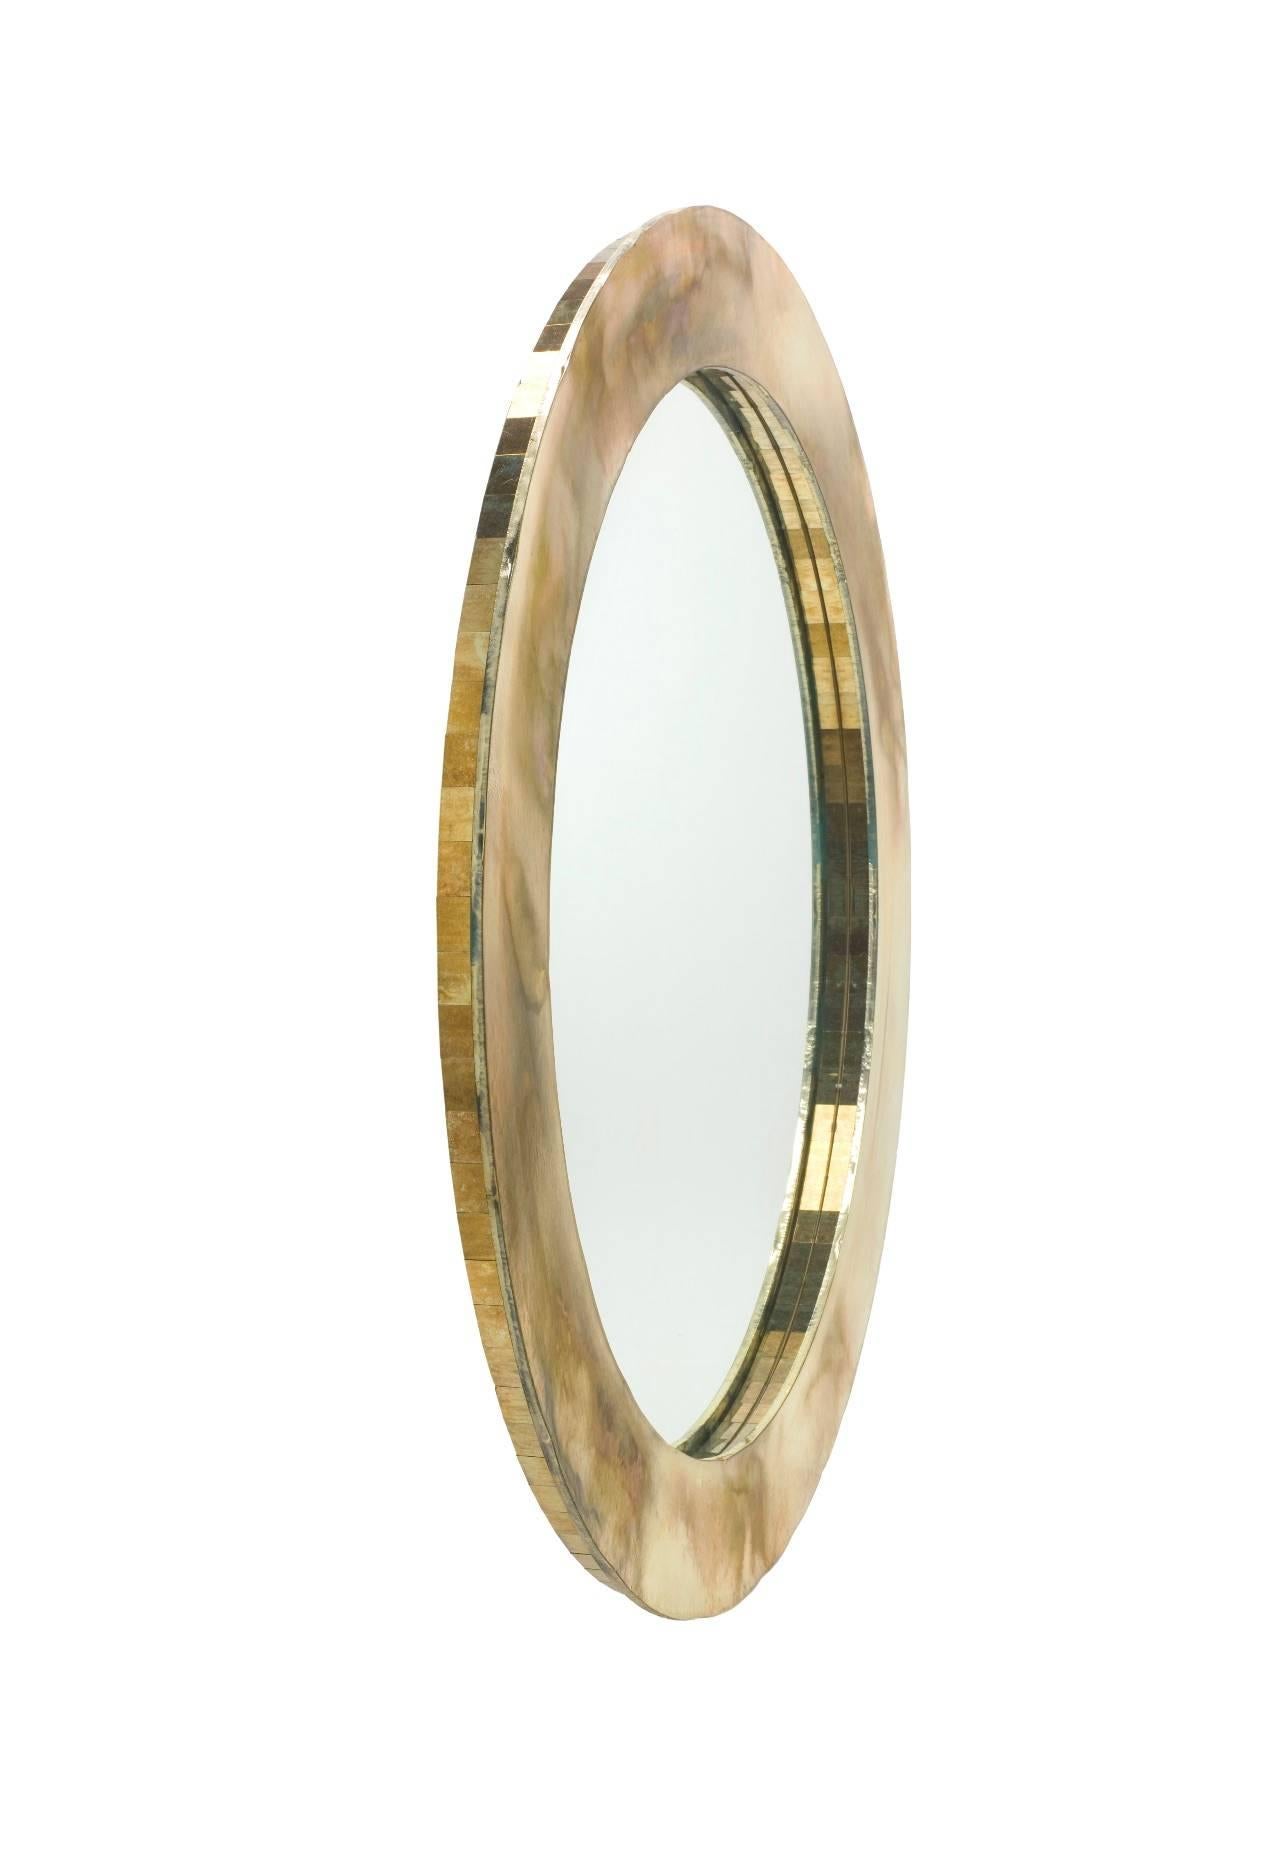 Life mirror by Sabrina Landini. Hand-silvered glass using precious metals. Small cut pieces of glass are inlayed into the inner rim and on the outside of the piece which gives a unique reflective and refractive effect.

Manufactured in Tuscany,